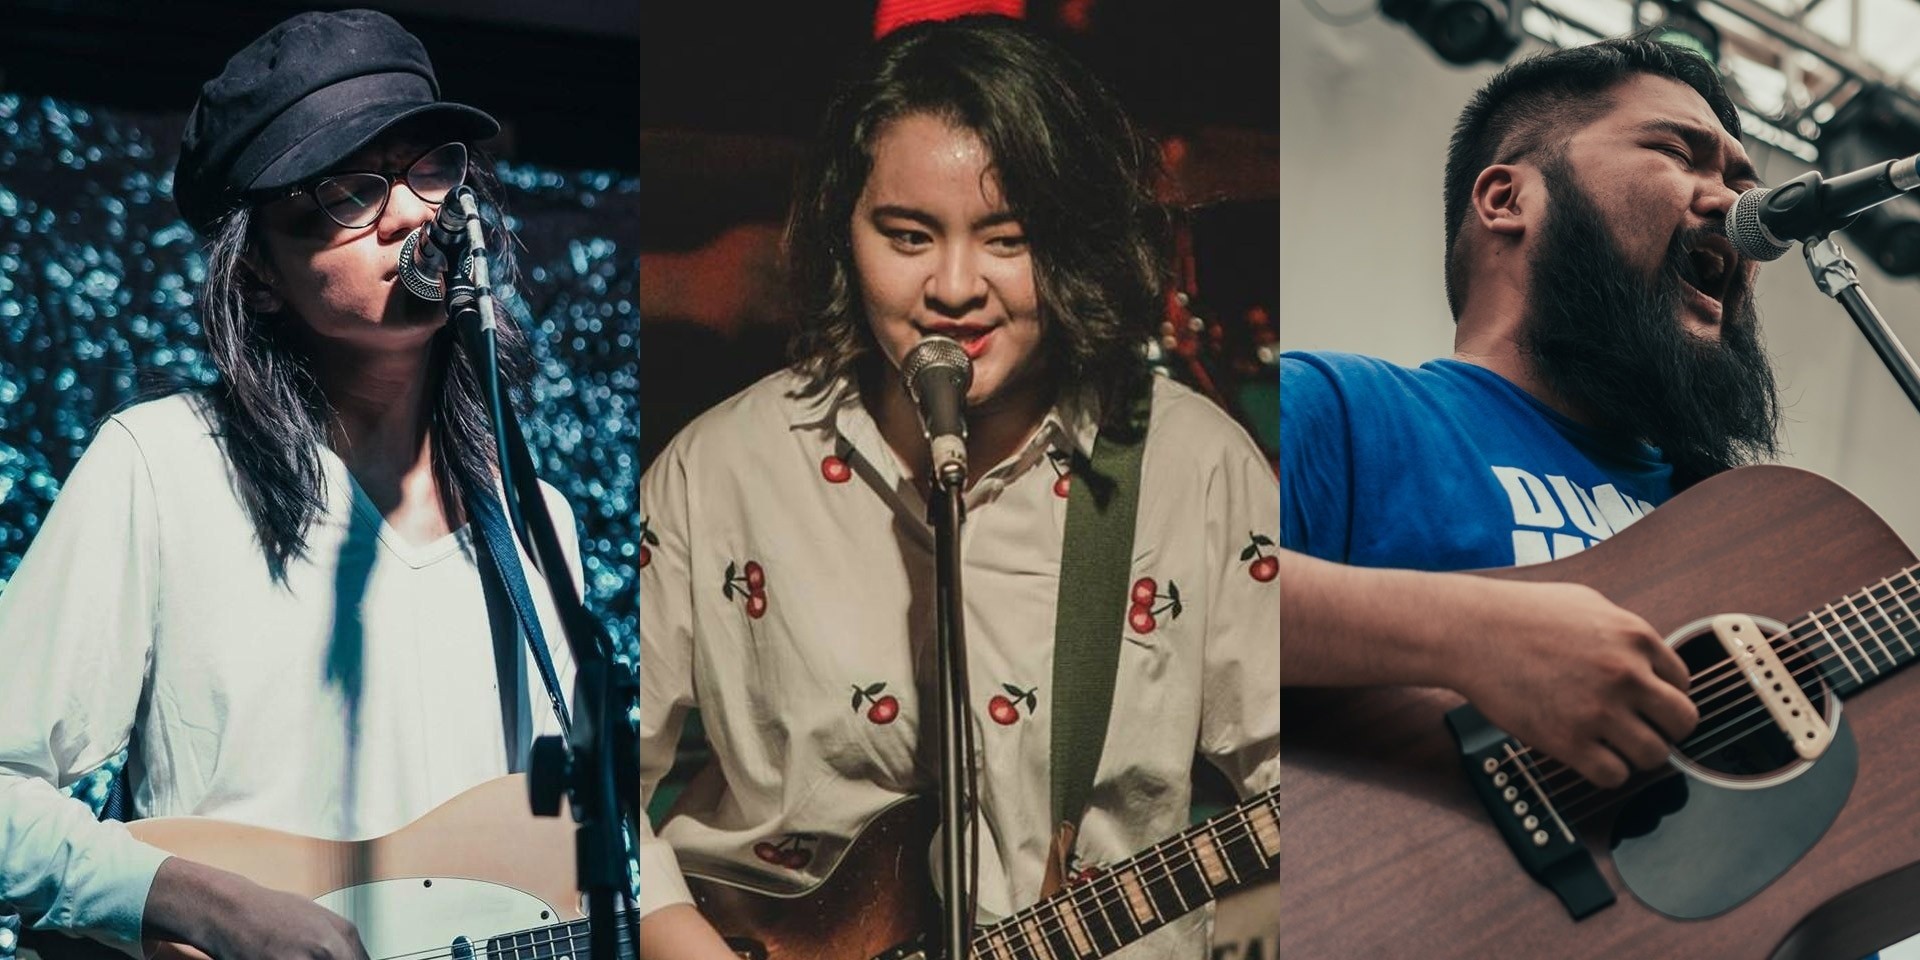 Unique, Elise Huang, I Belong to the Zoo, and more to perform at La Union Surfing Break: Hang Loose